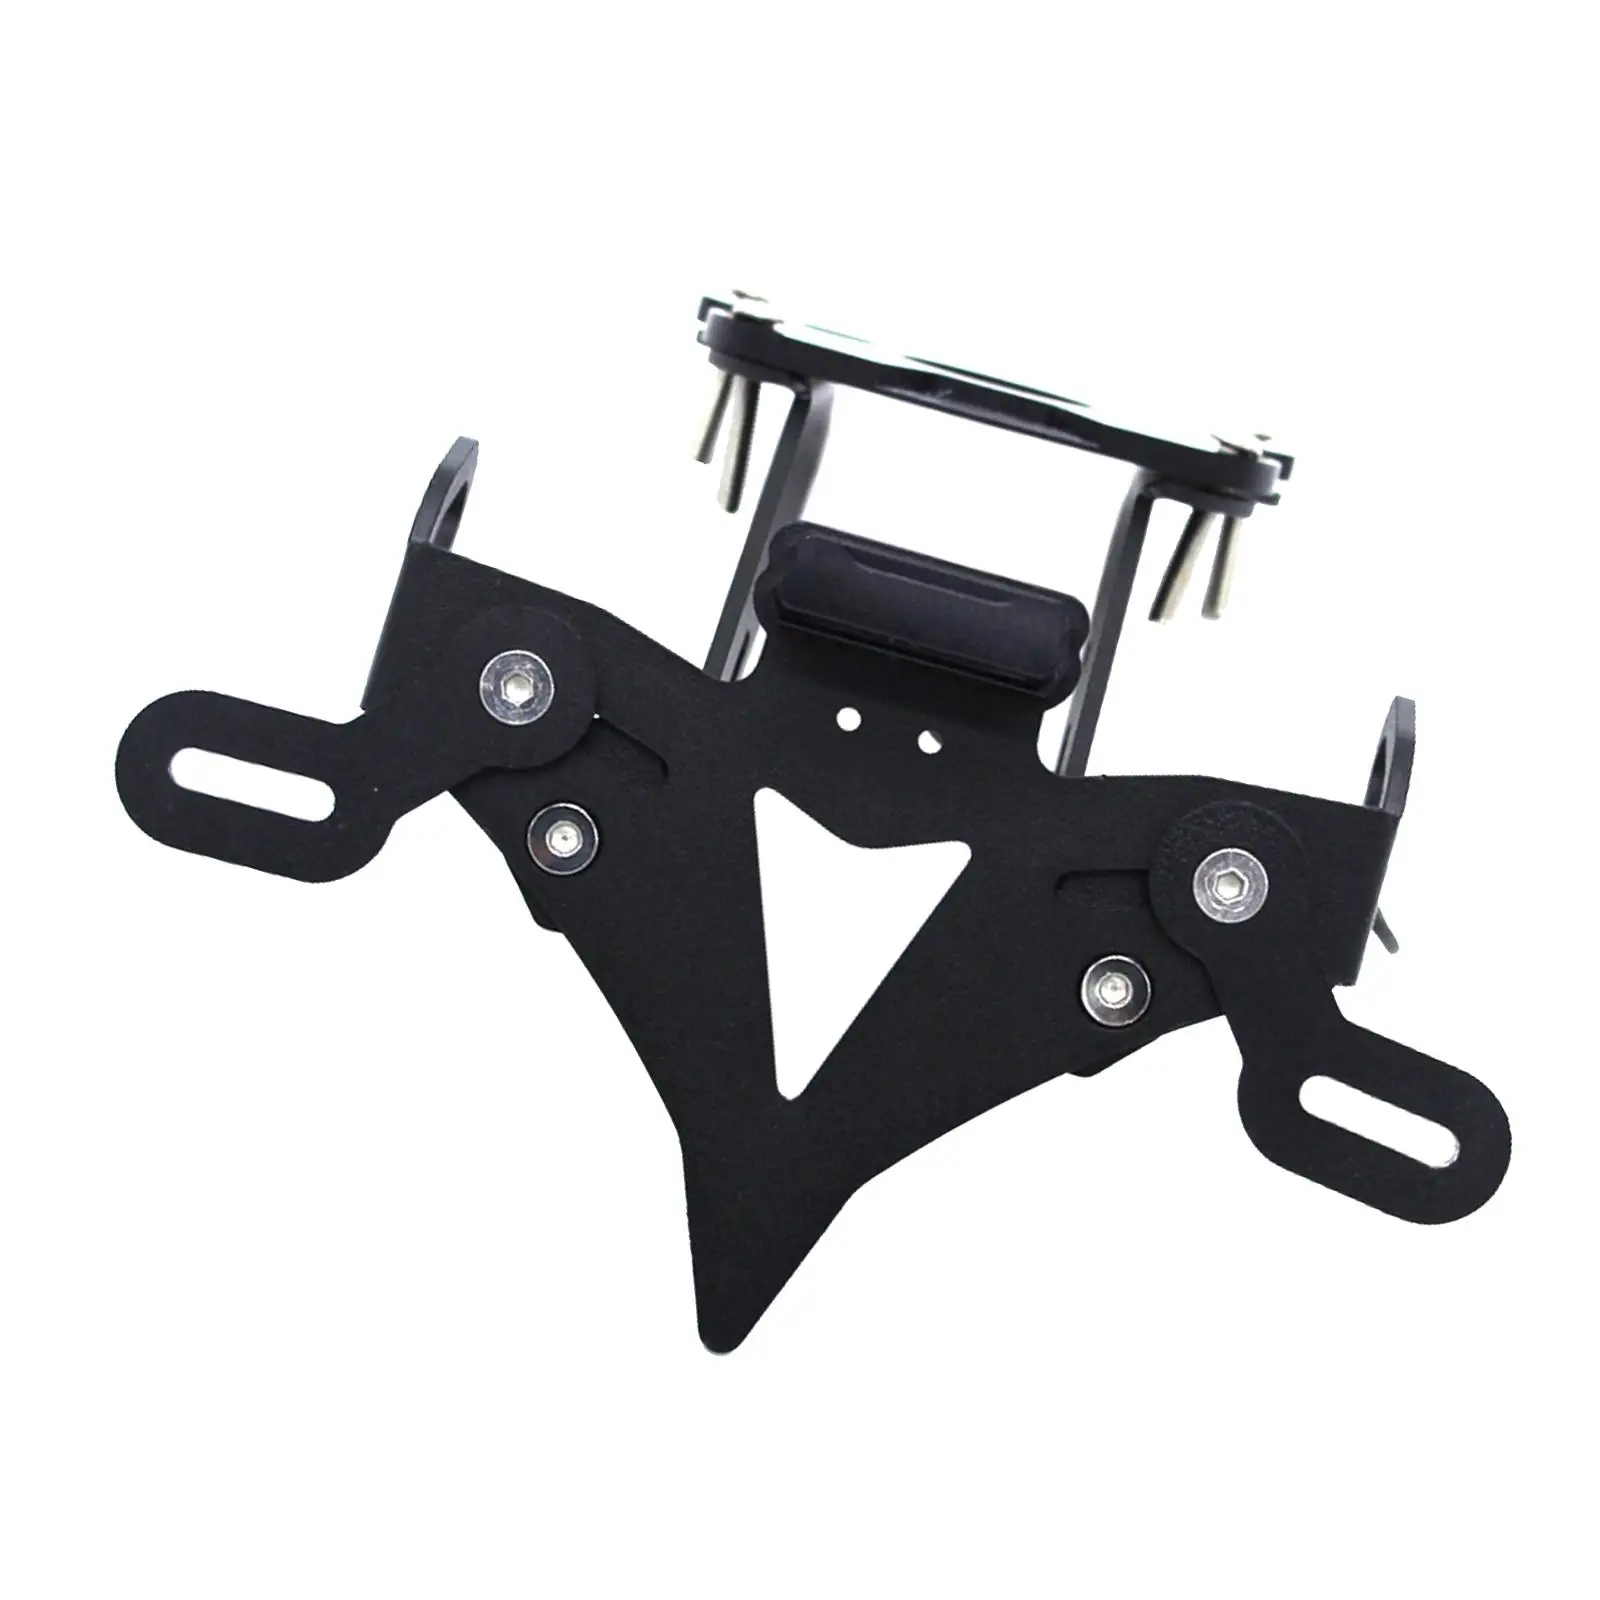 License Plate Holder Replacement Easy to Install Body Frame Tail Mount Parts Rear Fender Bracket for Yamaha MT09 Motorbike